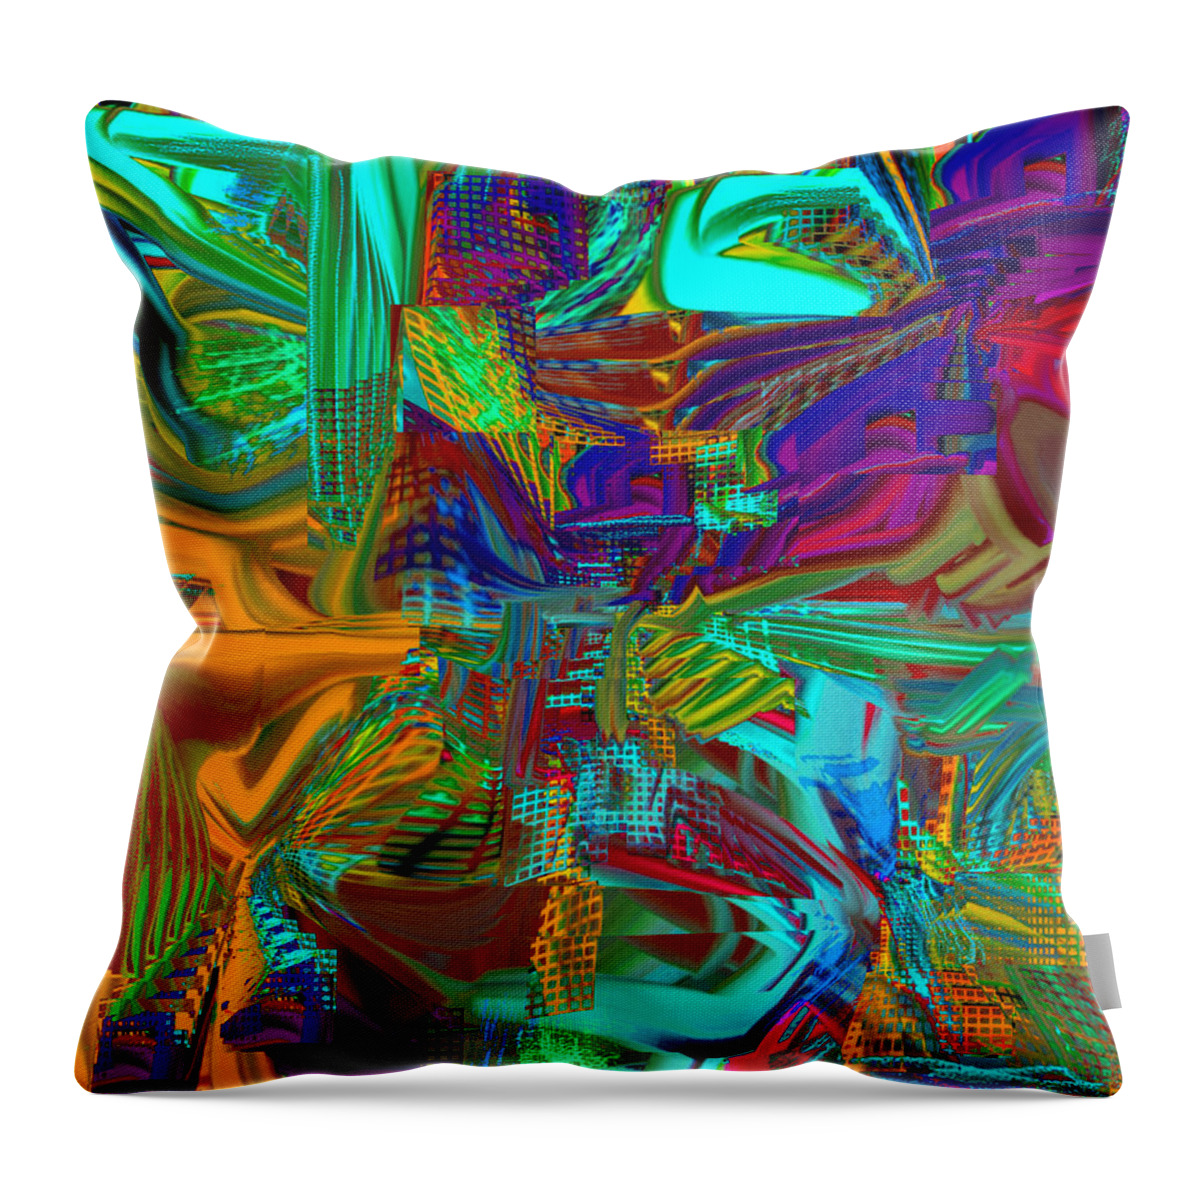 Original Modern Art Abstract Contemporary Vivid Colors Throw Pillow featuring the digital art Ab Sq by Phillip Mossbarger